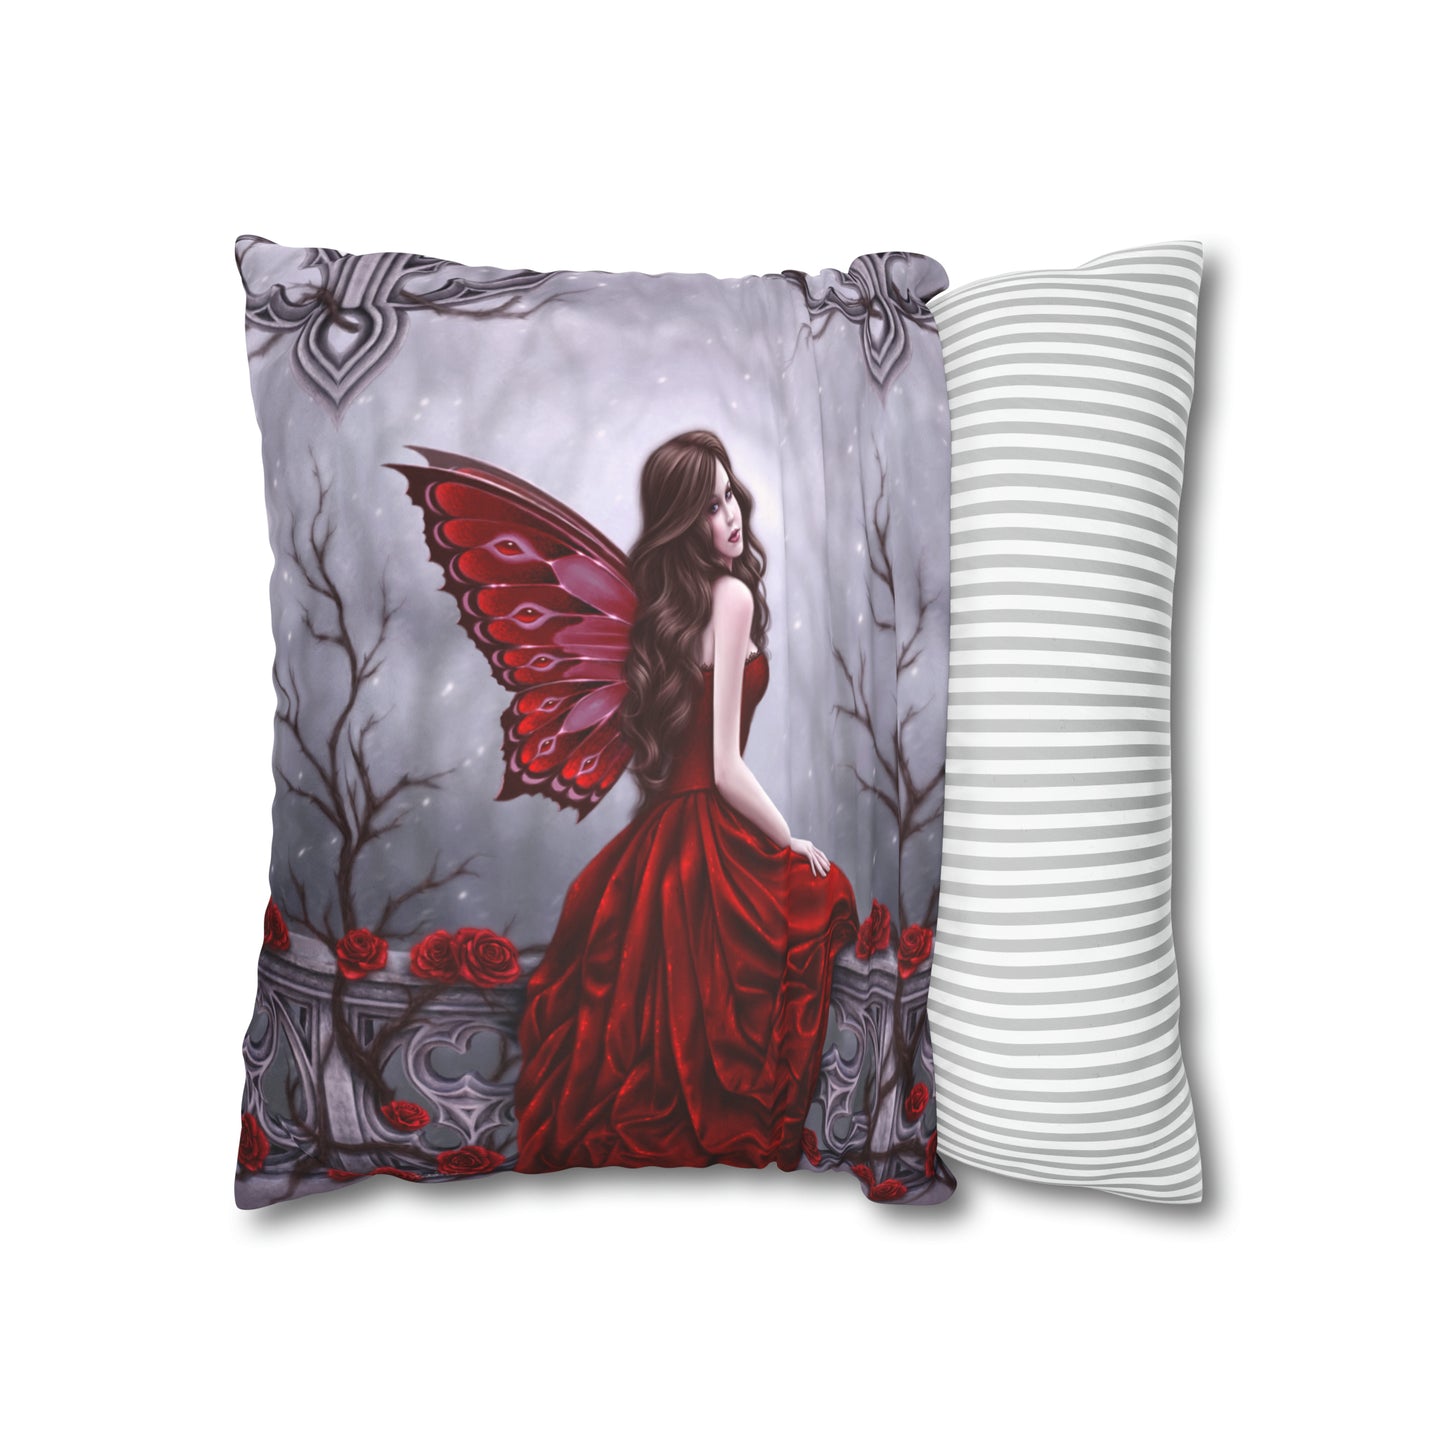 Throw Pillow Cover - Winter Rose